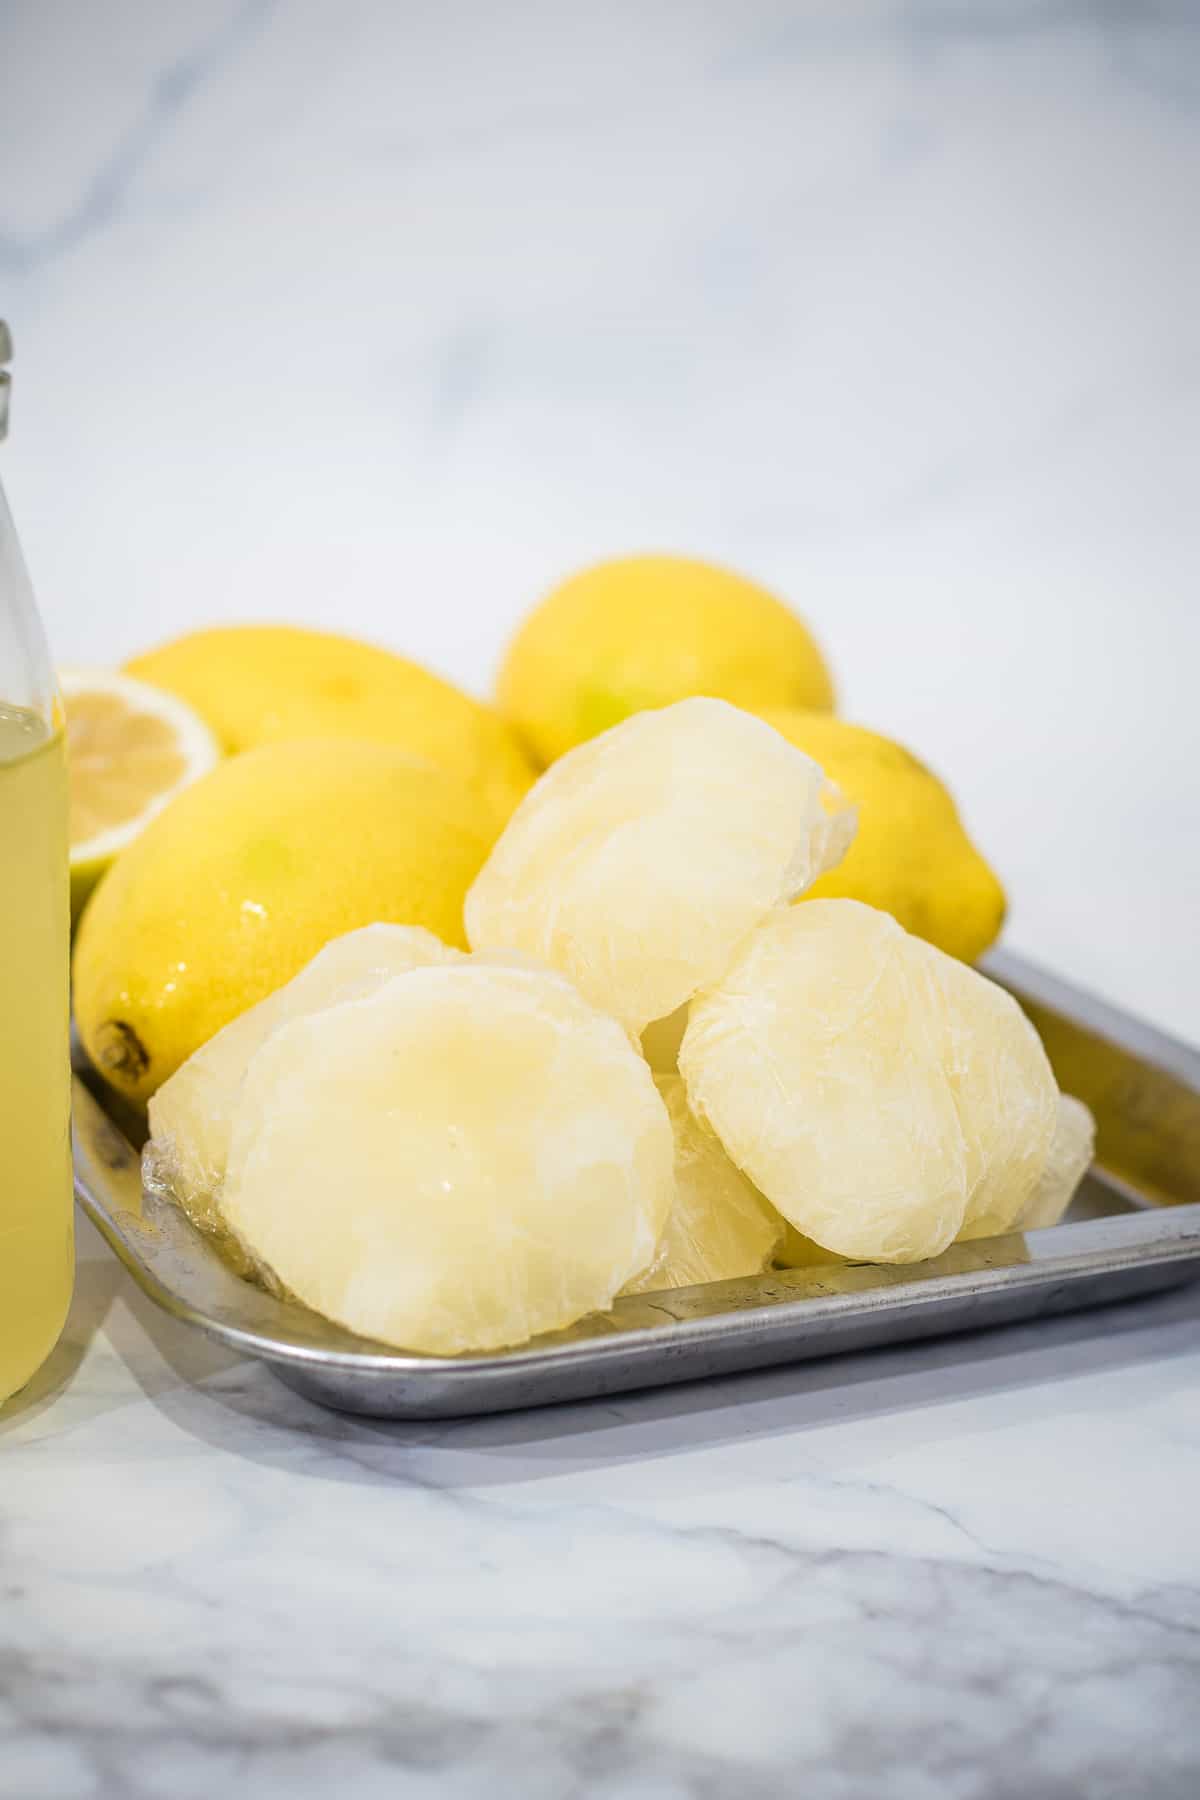 Wrapped frozen lemonade concentrate on a tray